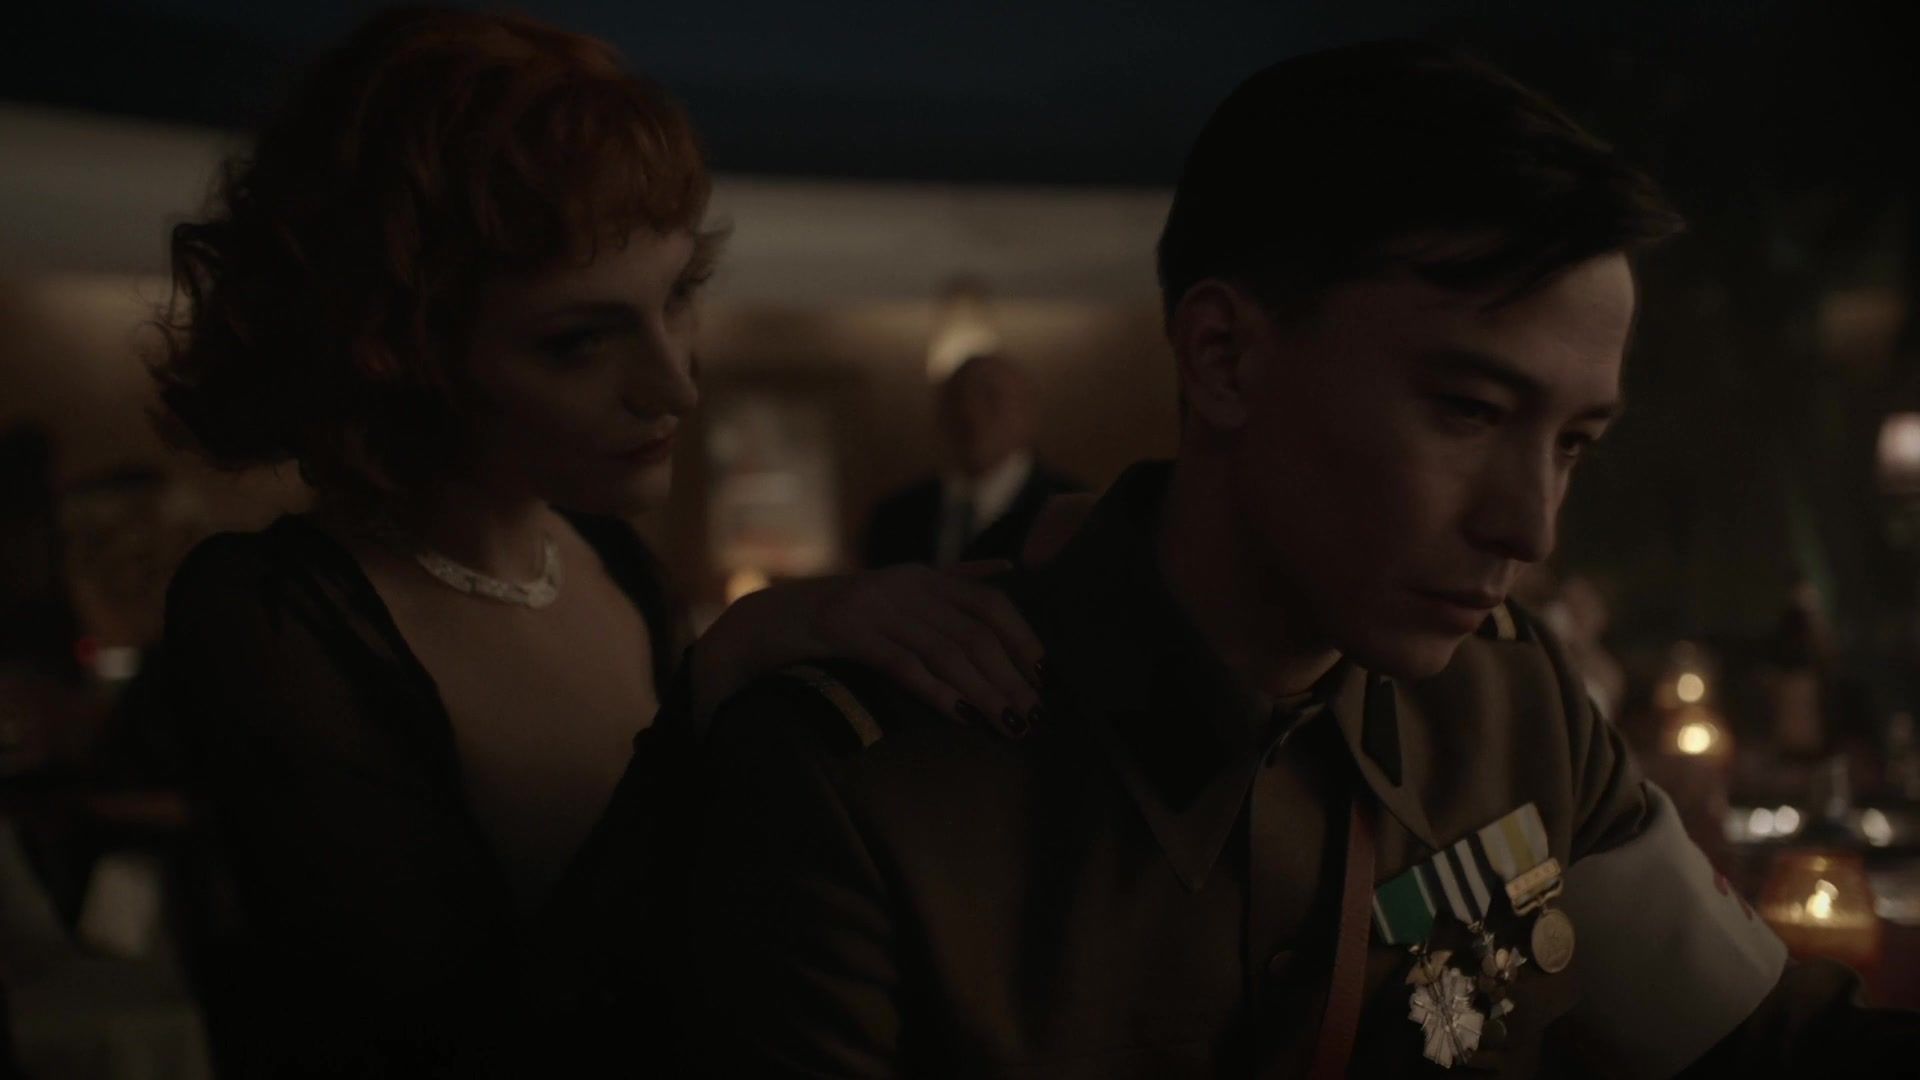 HellXX Nude Destiny Millns - The Man in the High Castle s04e03 (2019) Wet Cunts